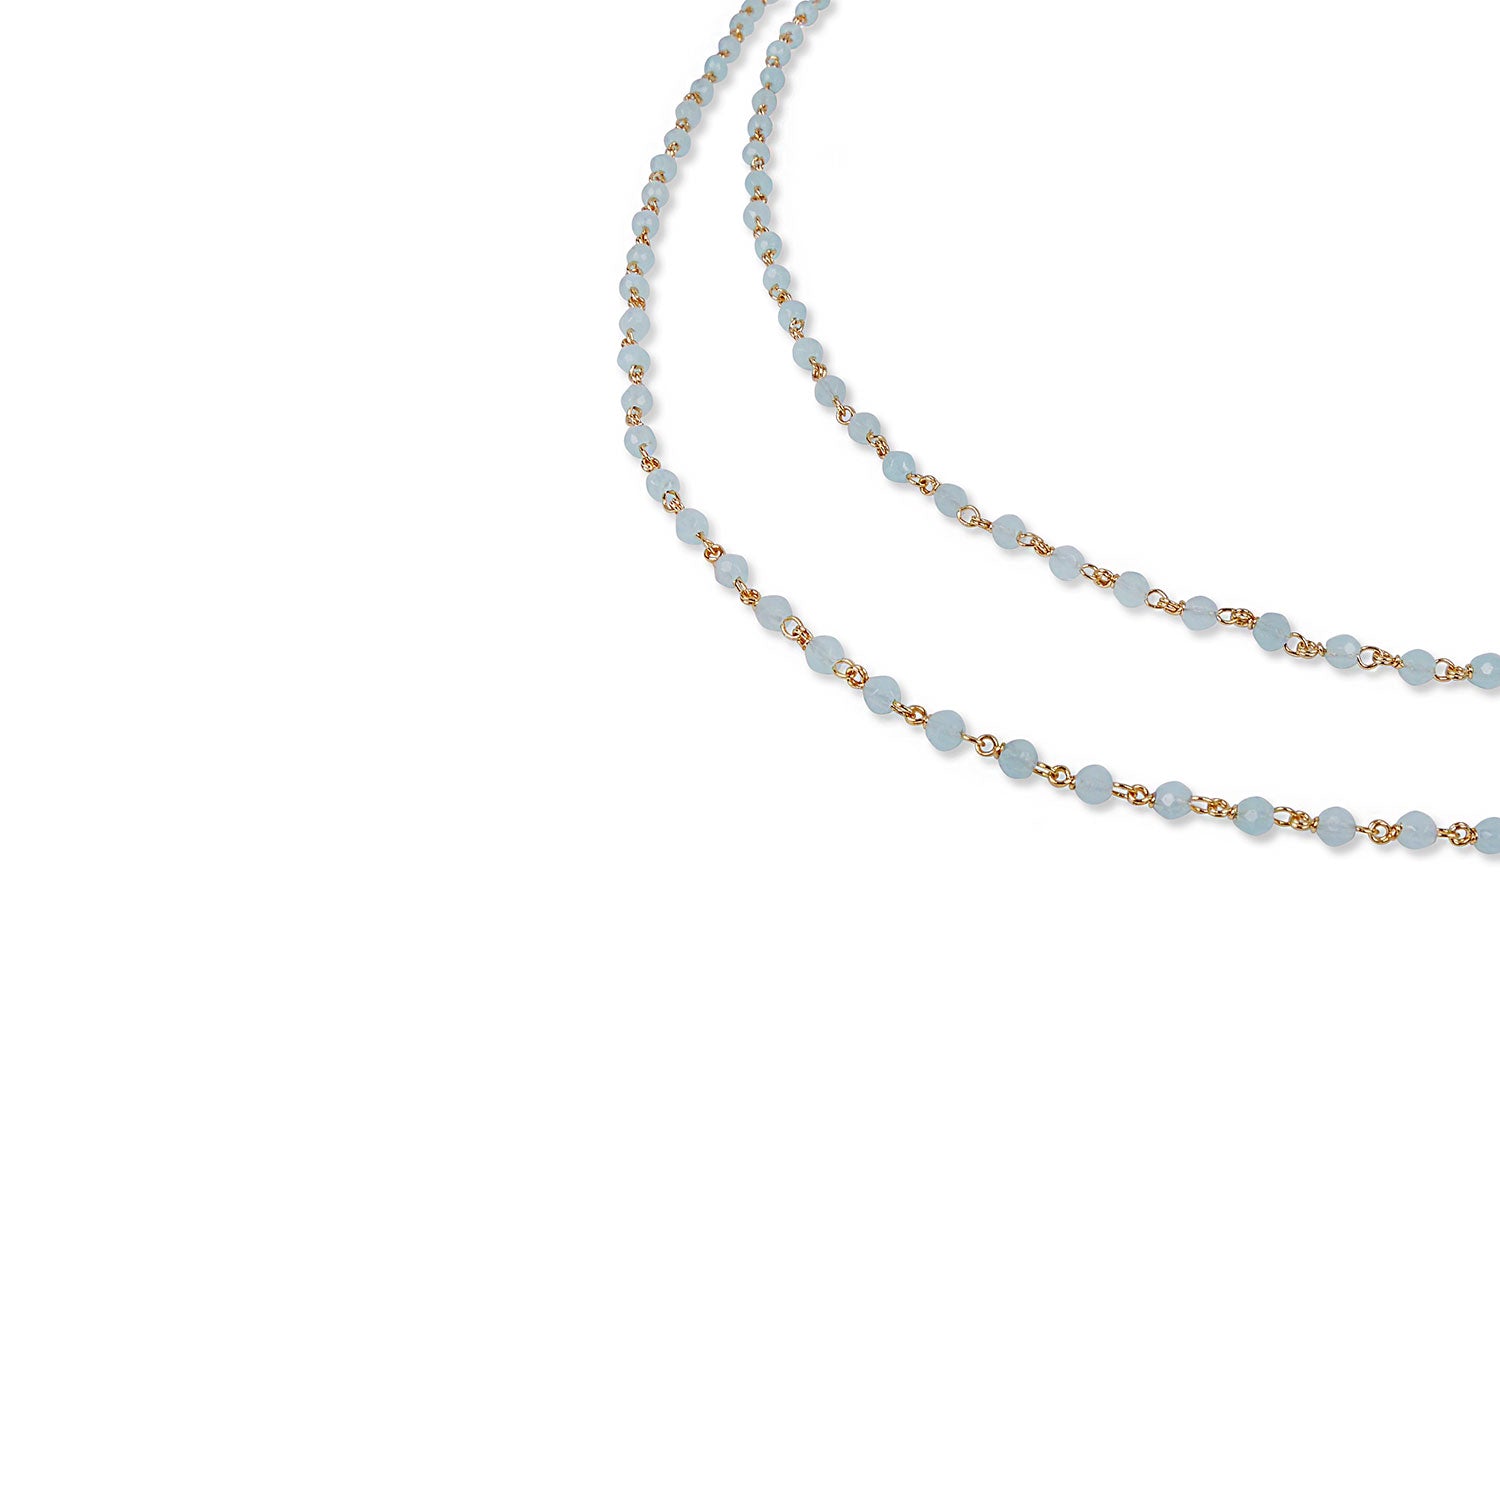 Maria Layered Bead Necklace in Light Blue